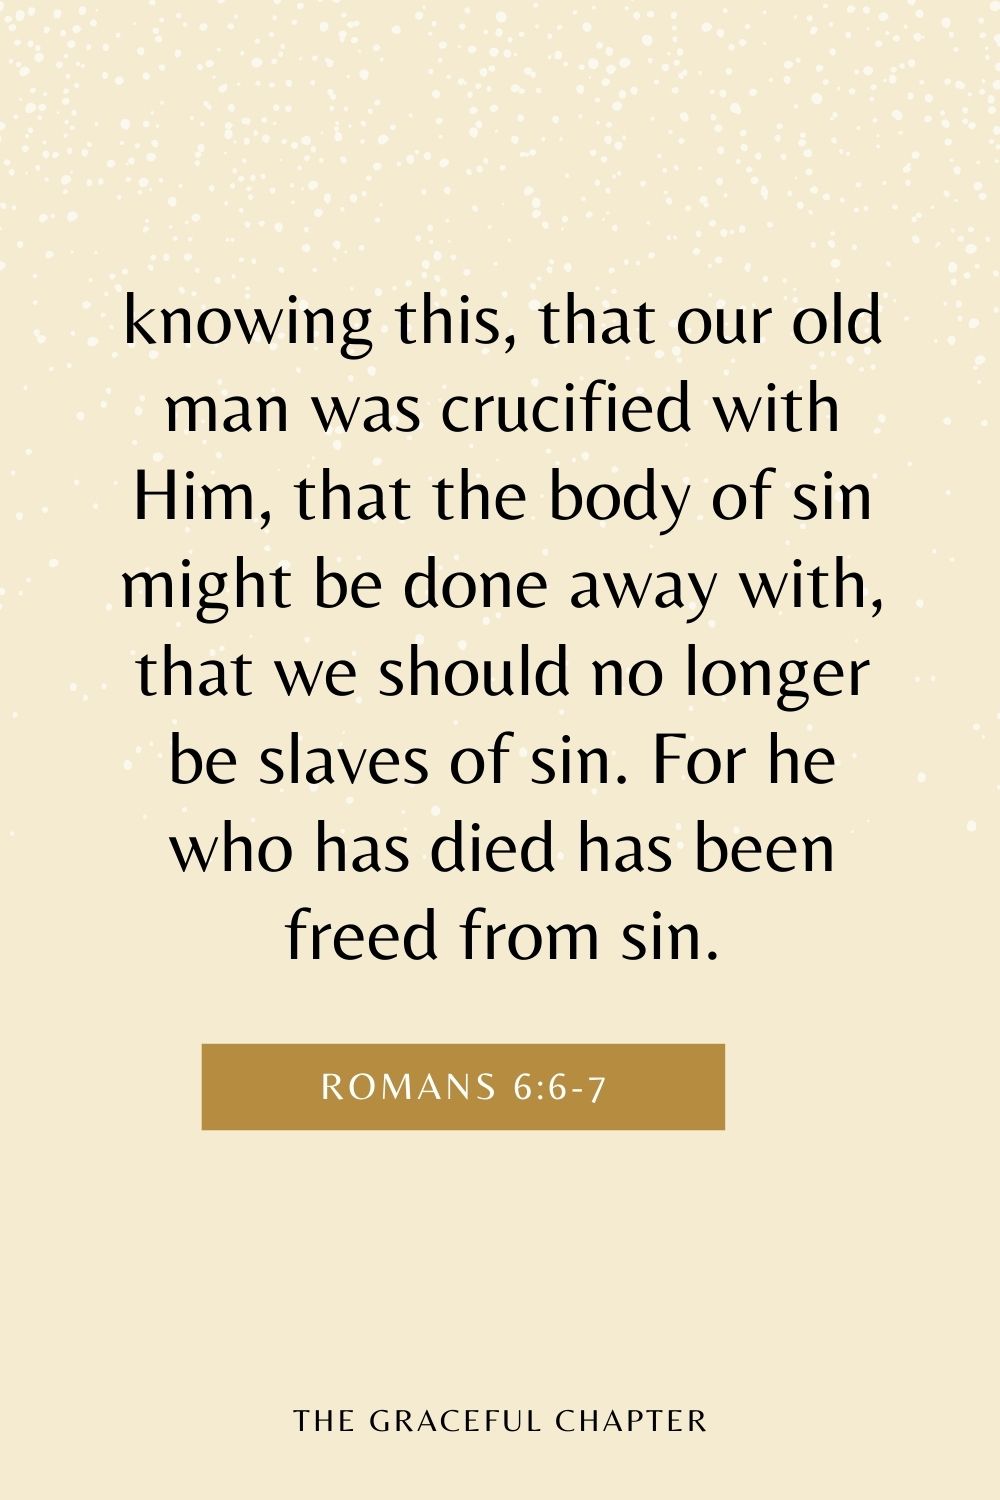 knowing this, that our old man was crucified with Him, that the body of sin might be done away with, that we should no longer be slaves of sin. For he who has died has been freed from sin. Romans 6:6-7